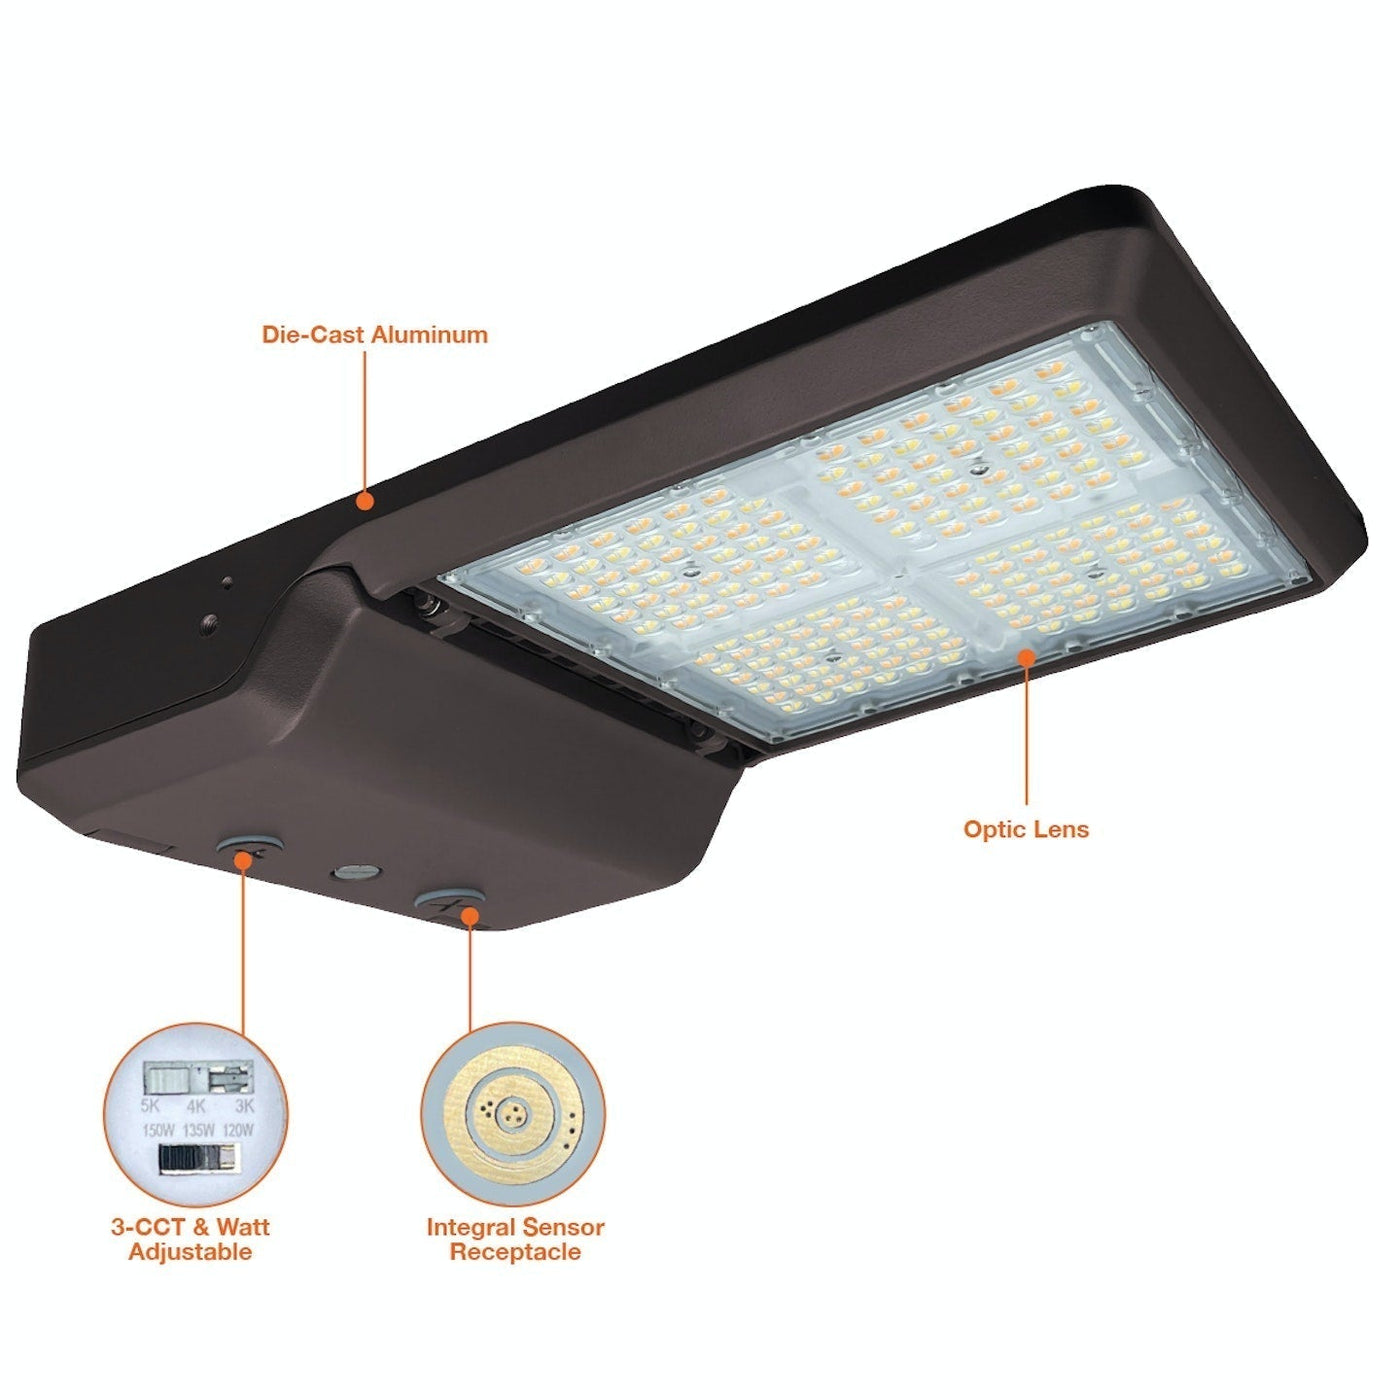 Large LED Area/Parking Lot Light, 46200 Lumen Max, Wattage and CCT Selectable, 120-277V, Bronze Finish